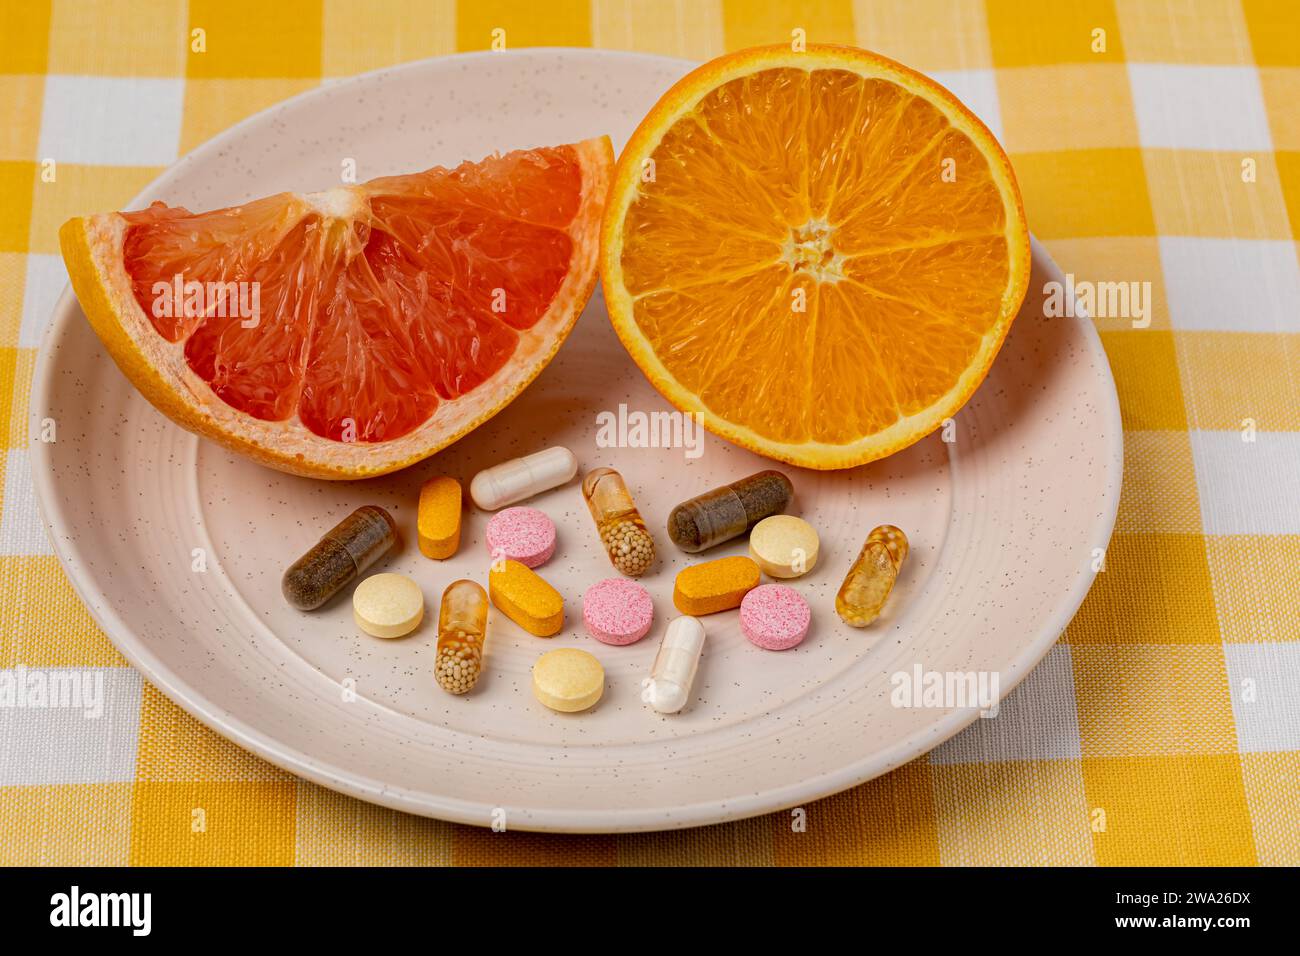 Sliced orange and grapefruit on plate with vitamins and dietary supplements. Organic fruit, healthy diet and nutrition concept. Stock Photo